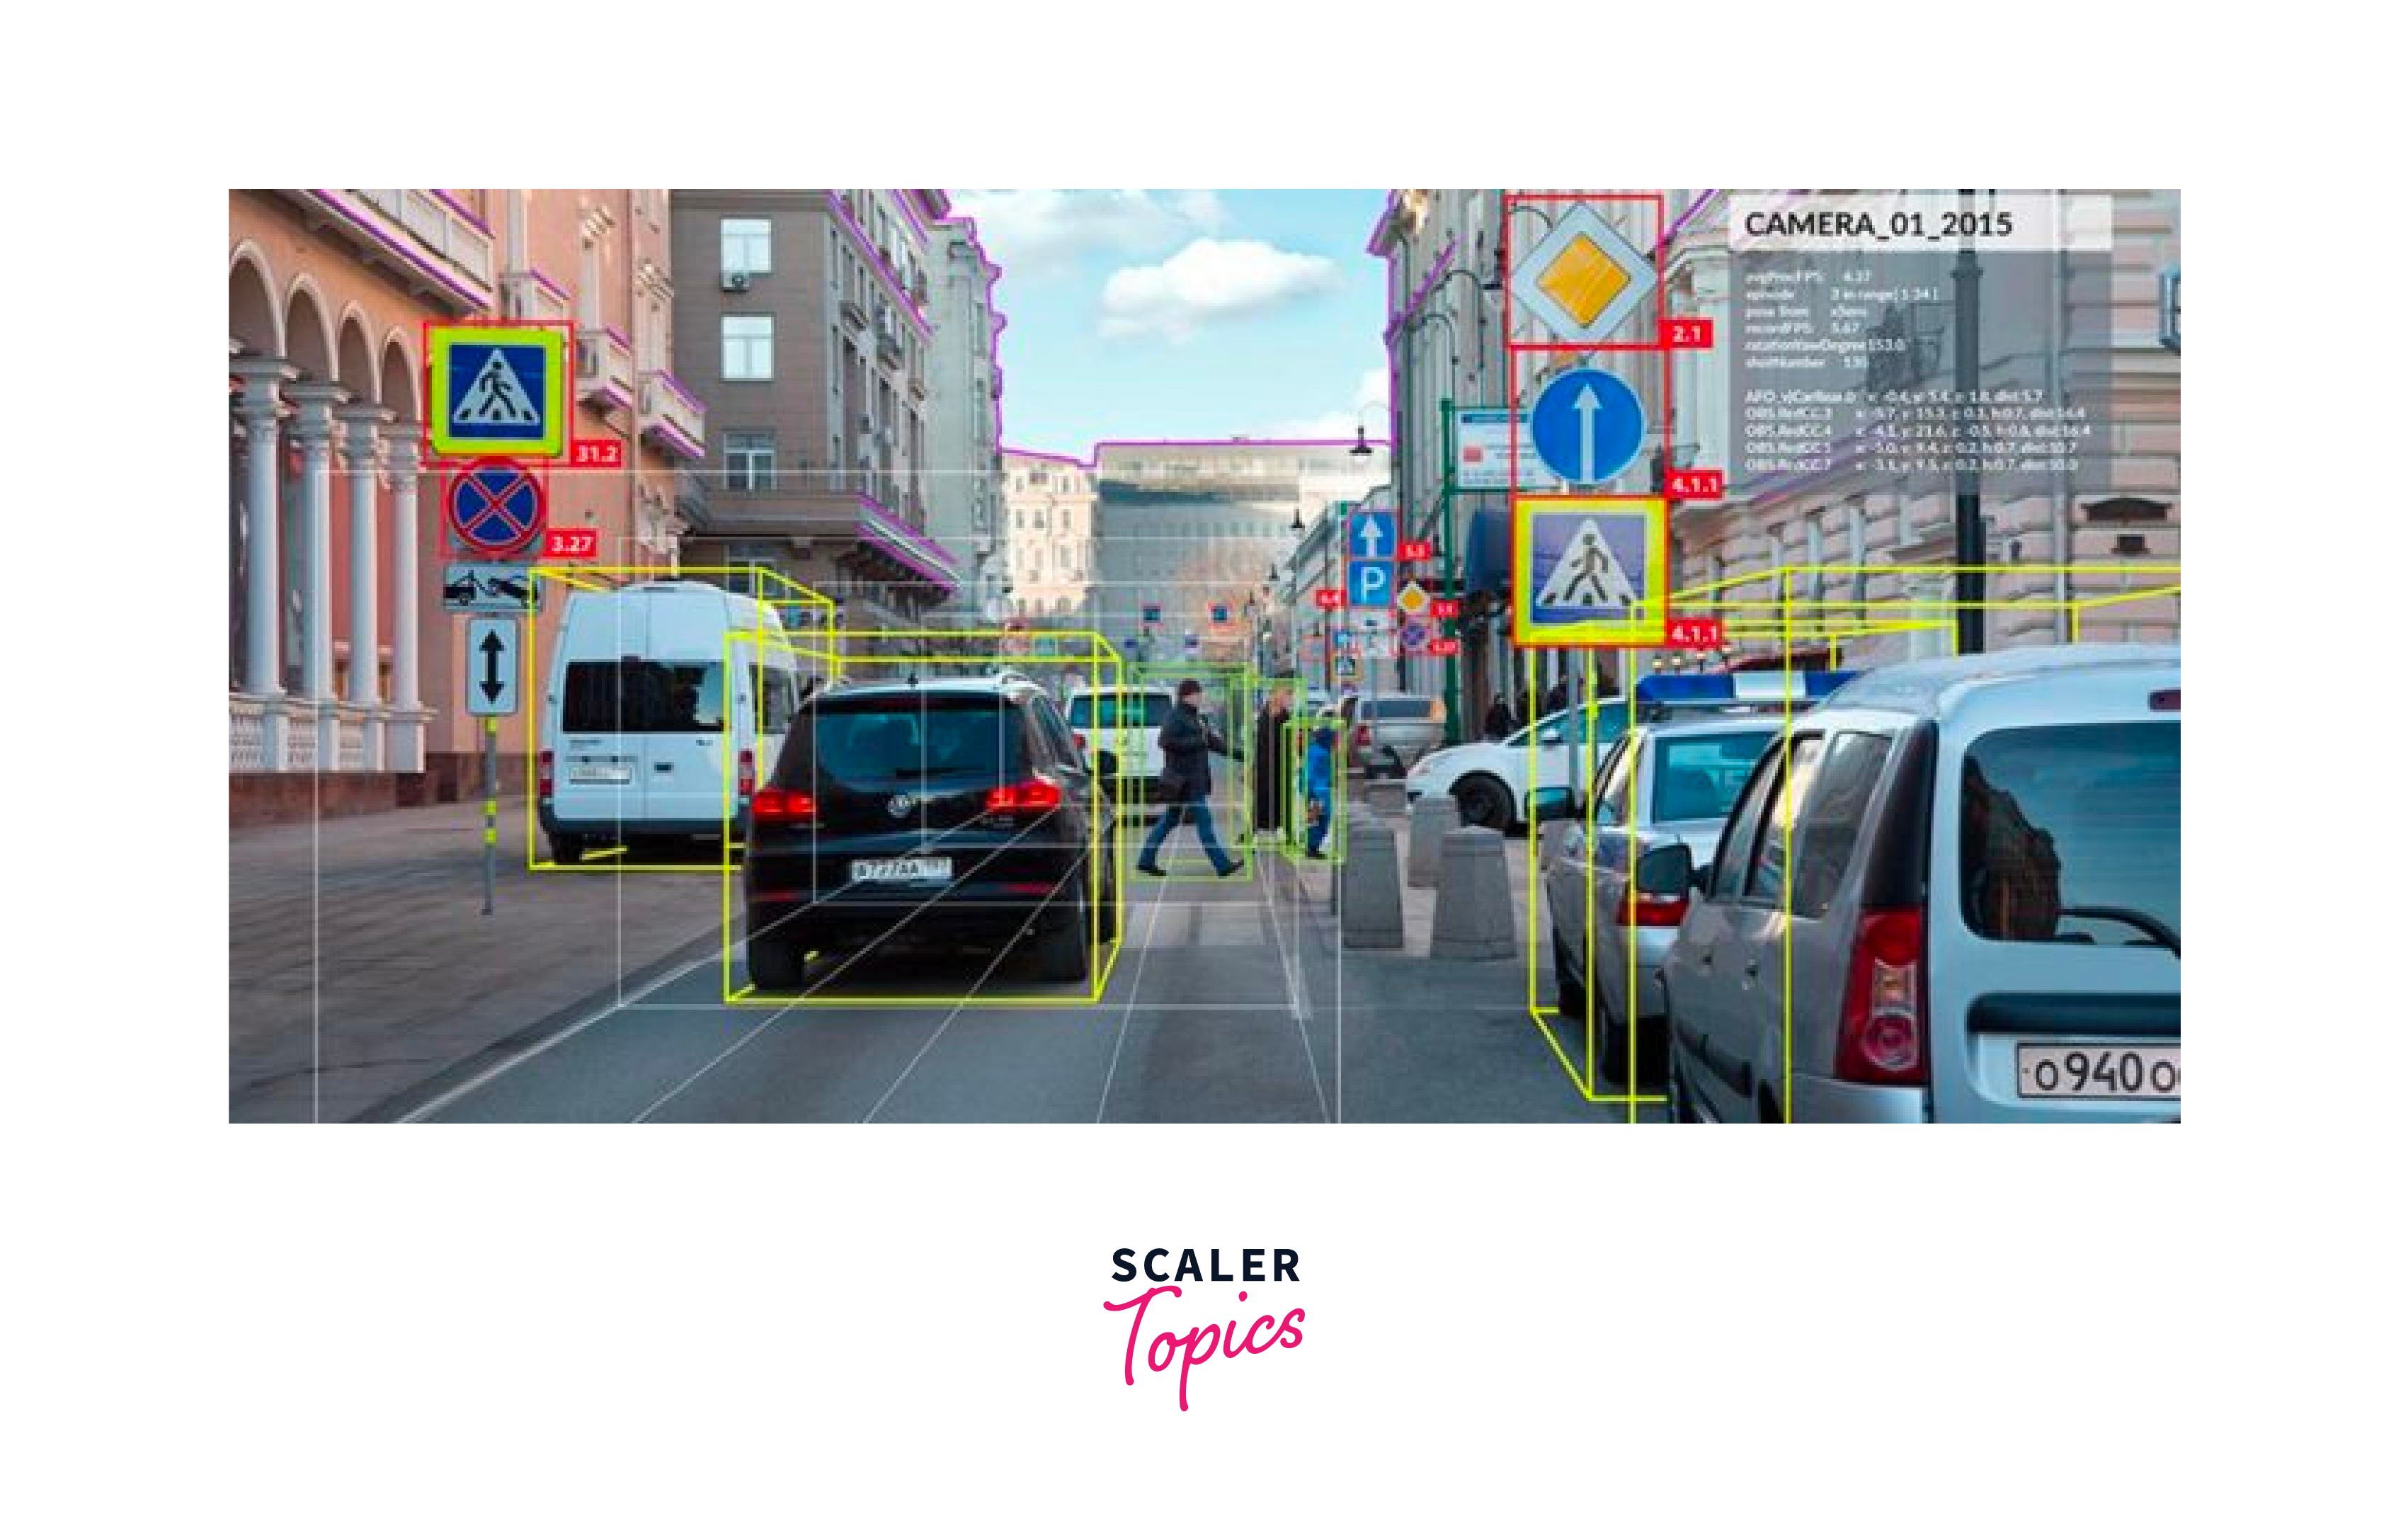 Applications of Object Detection